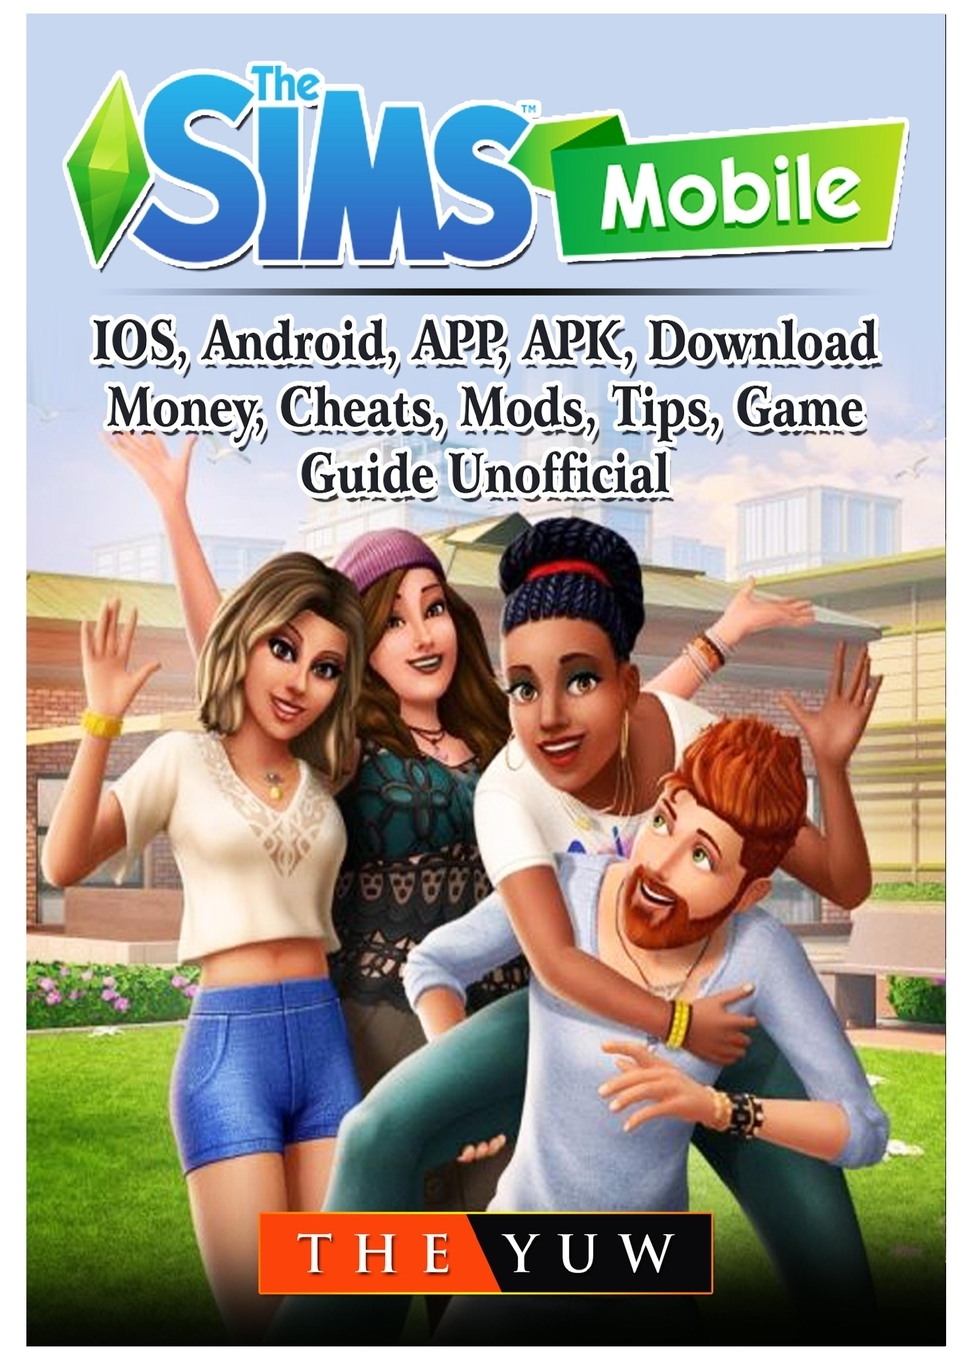 The Sims Mobile, Ios, Android, App, Apk, Download, Money, Cheats, Mods,  Tips, Game Guide Unofficial (Paperback) 